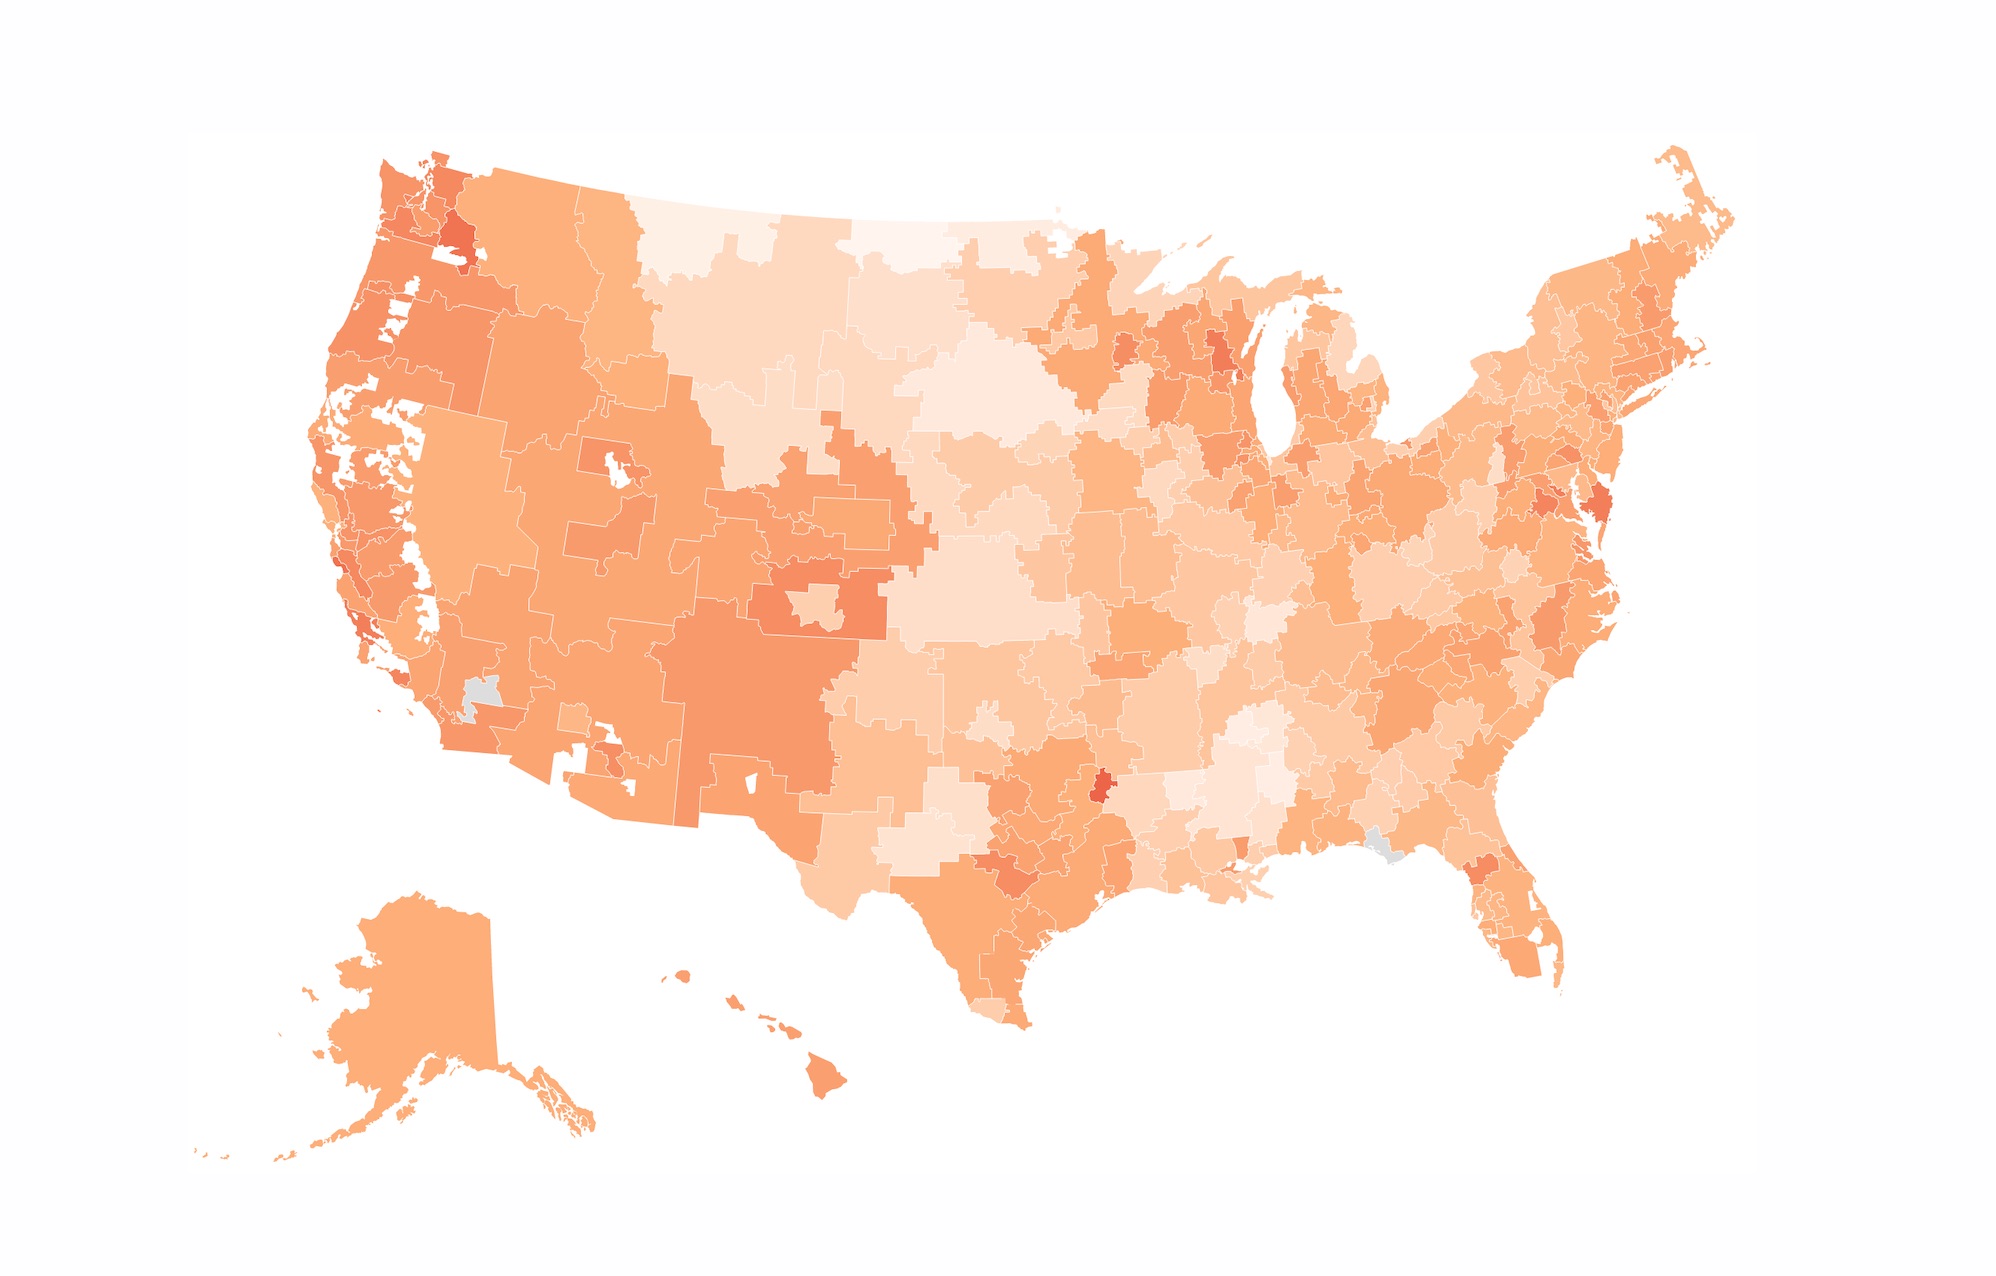 How to shift Alaska and Hawaii below the lower 48 for your interactive choropleth map